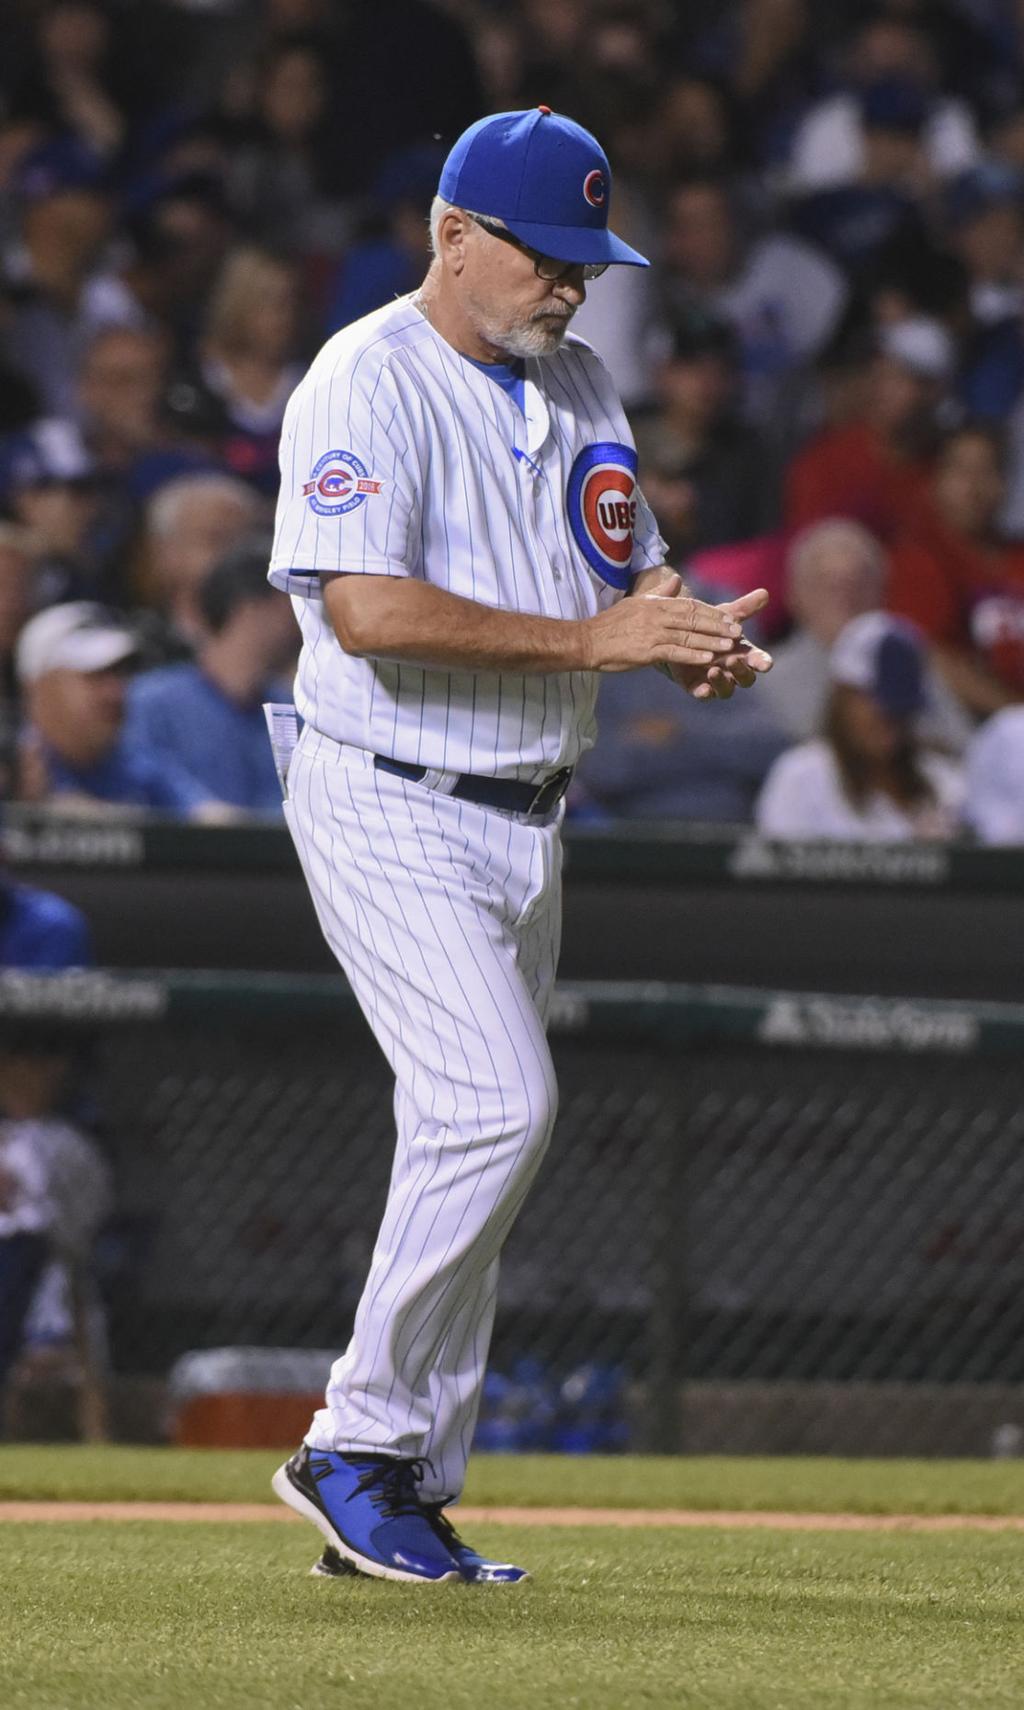 Chicago Cubs: Joe Maddon may be gone, but he'll never be forgotten